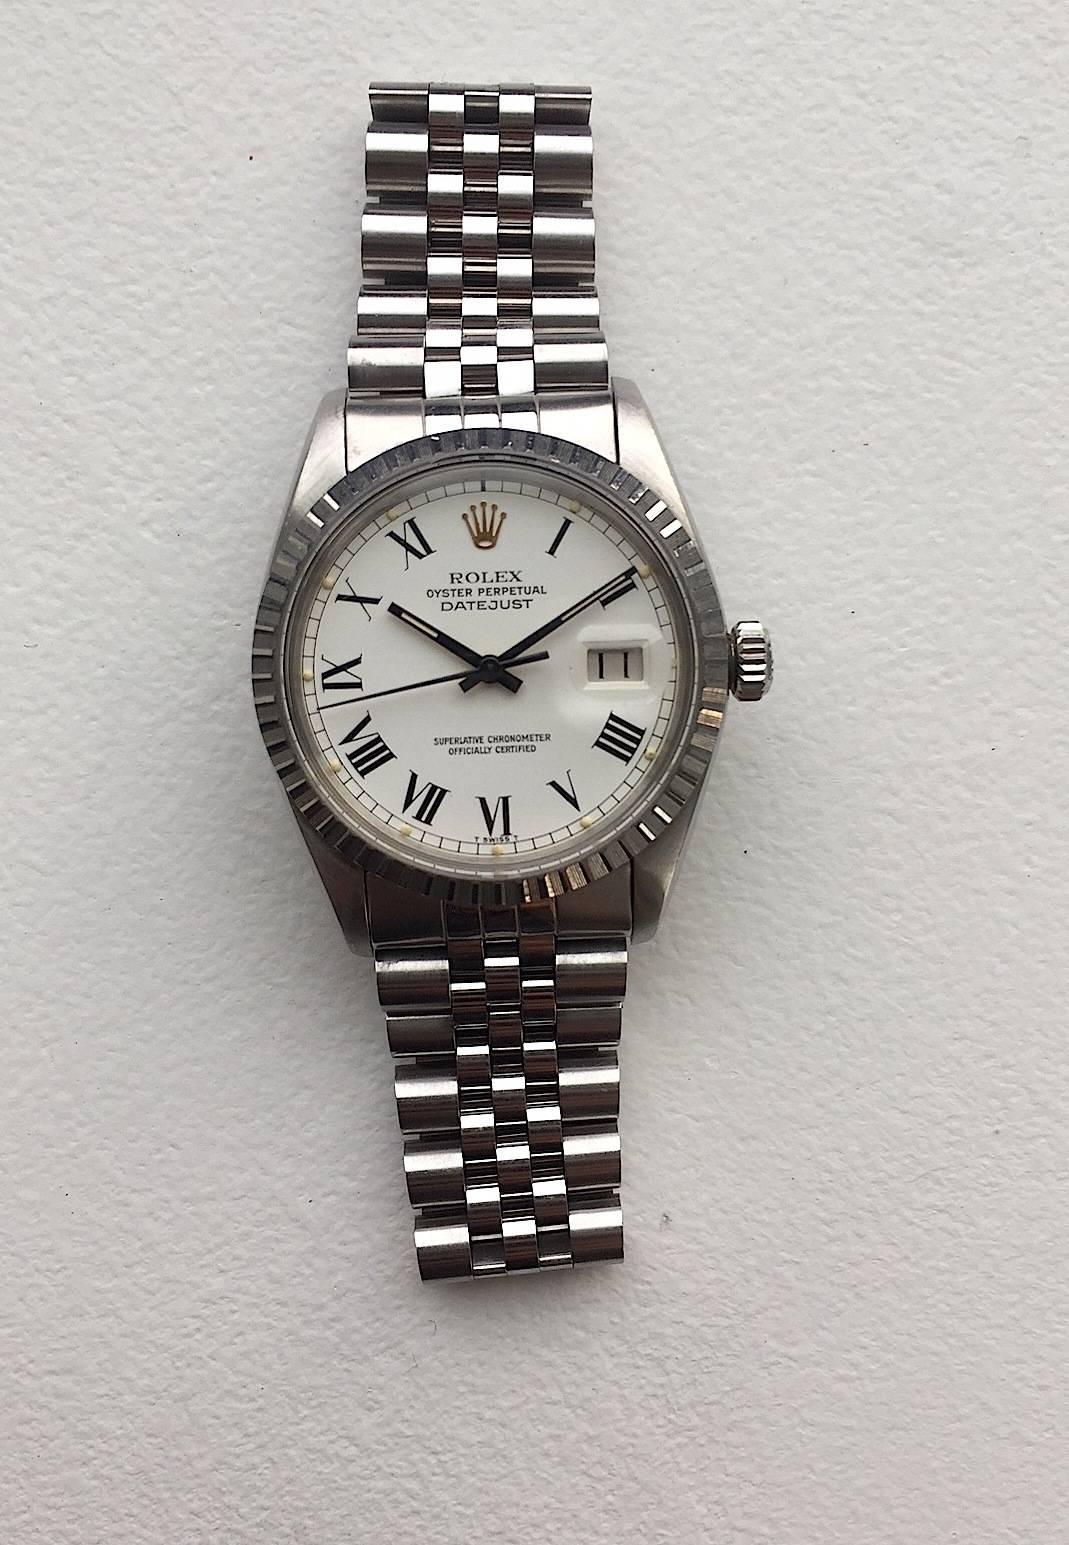 Rolex Stainless Steel Oyster Perpetual Datejust Quickset Wristwatch
Beautiful Factory White Buckley Dial with Black Roman Numerals and Matching Black Hands
Stainless Steel Engine Turned Bezel
Stainless Steel Case
36mm in size 
Features Rolex